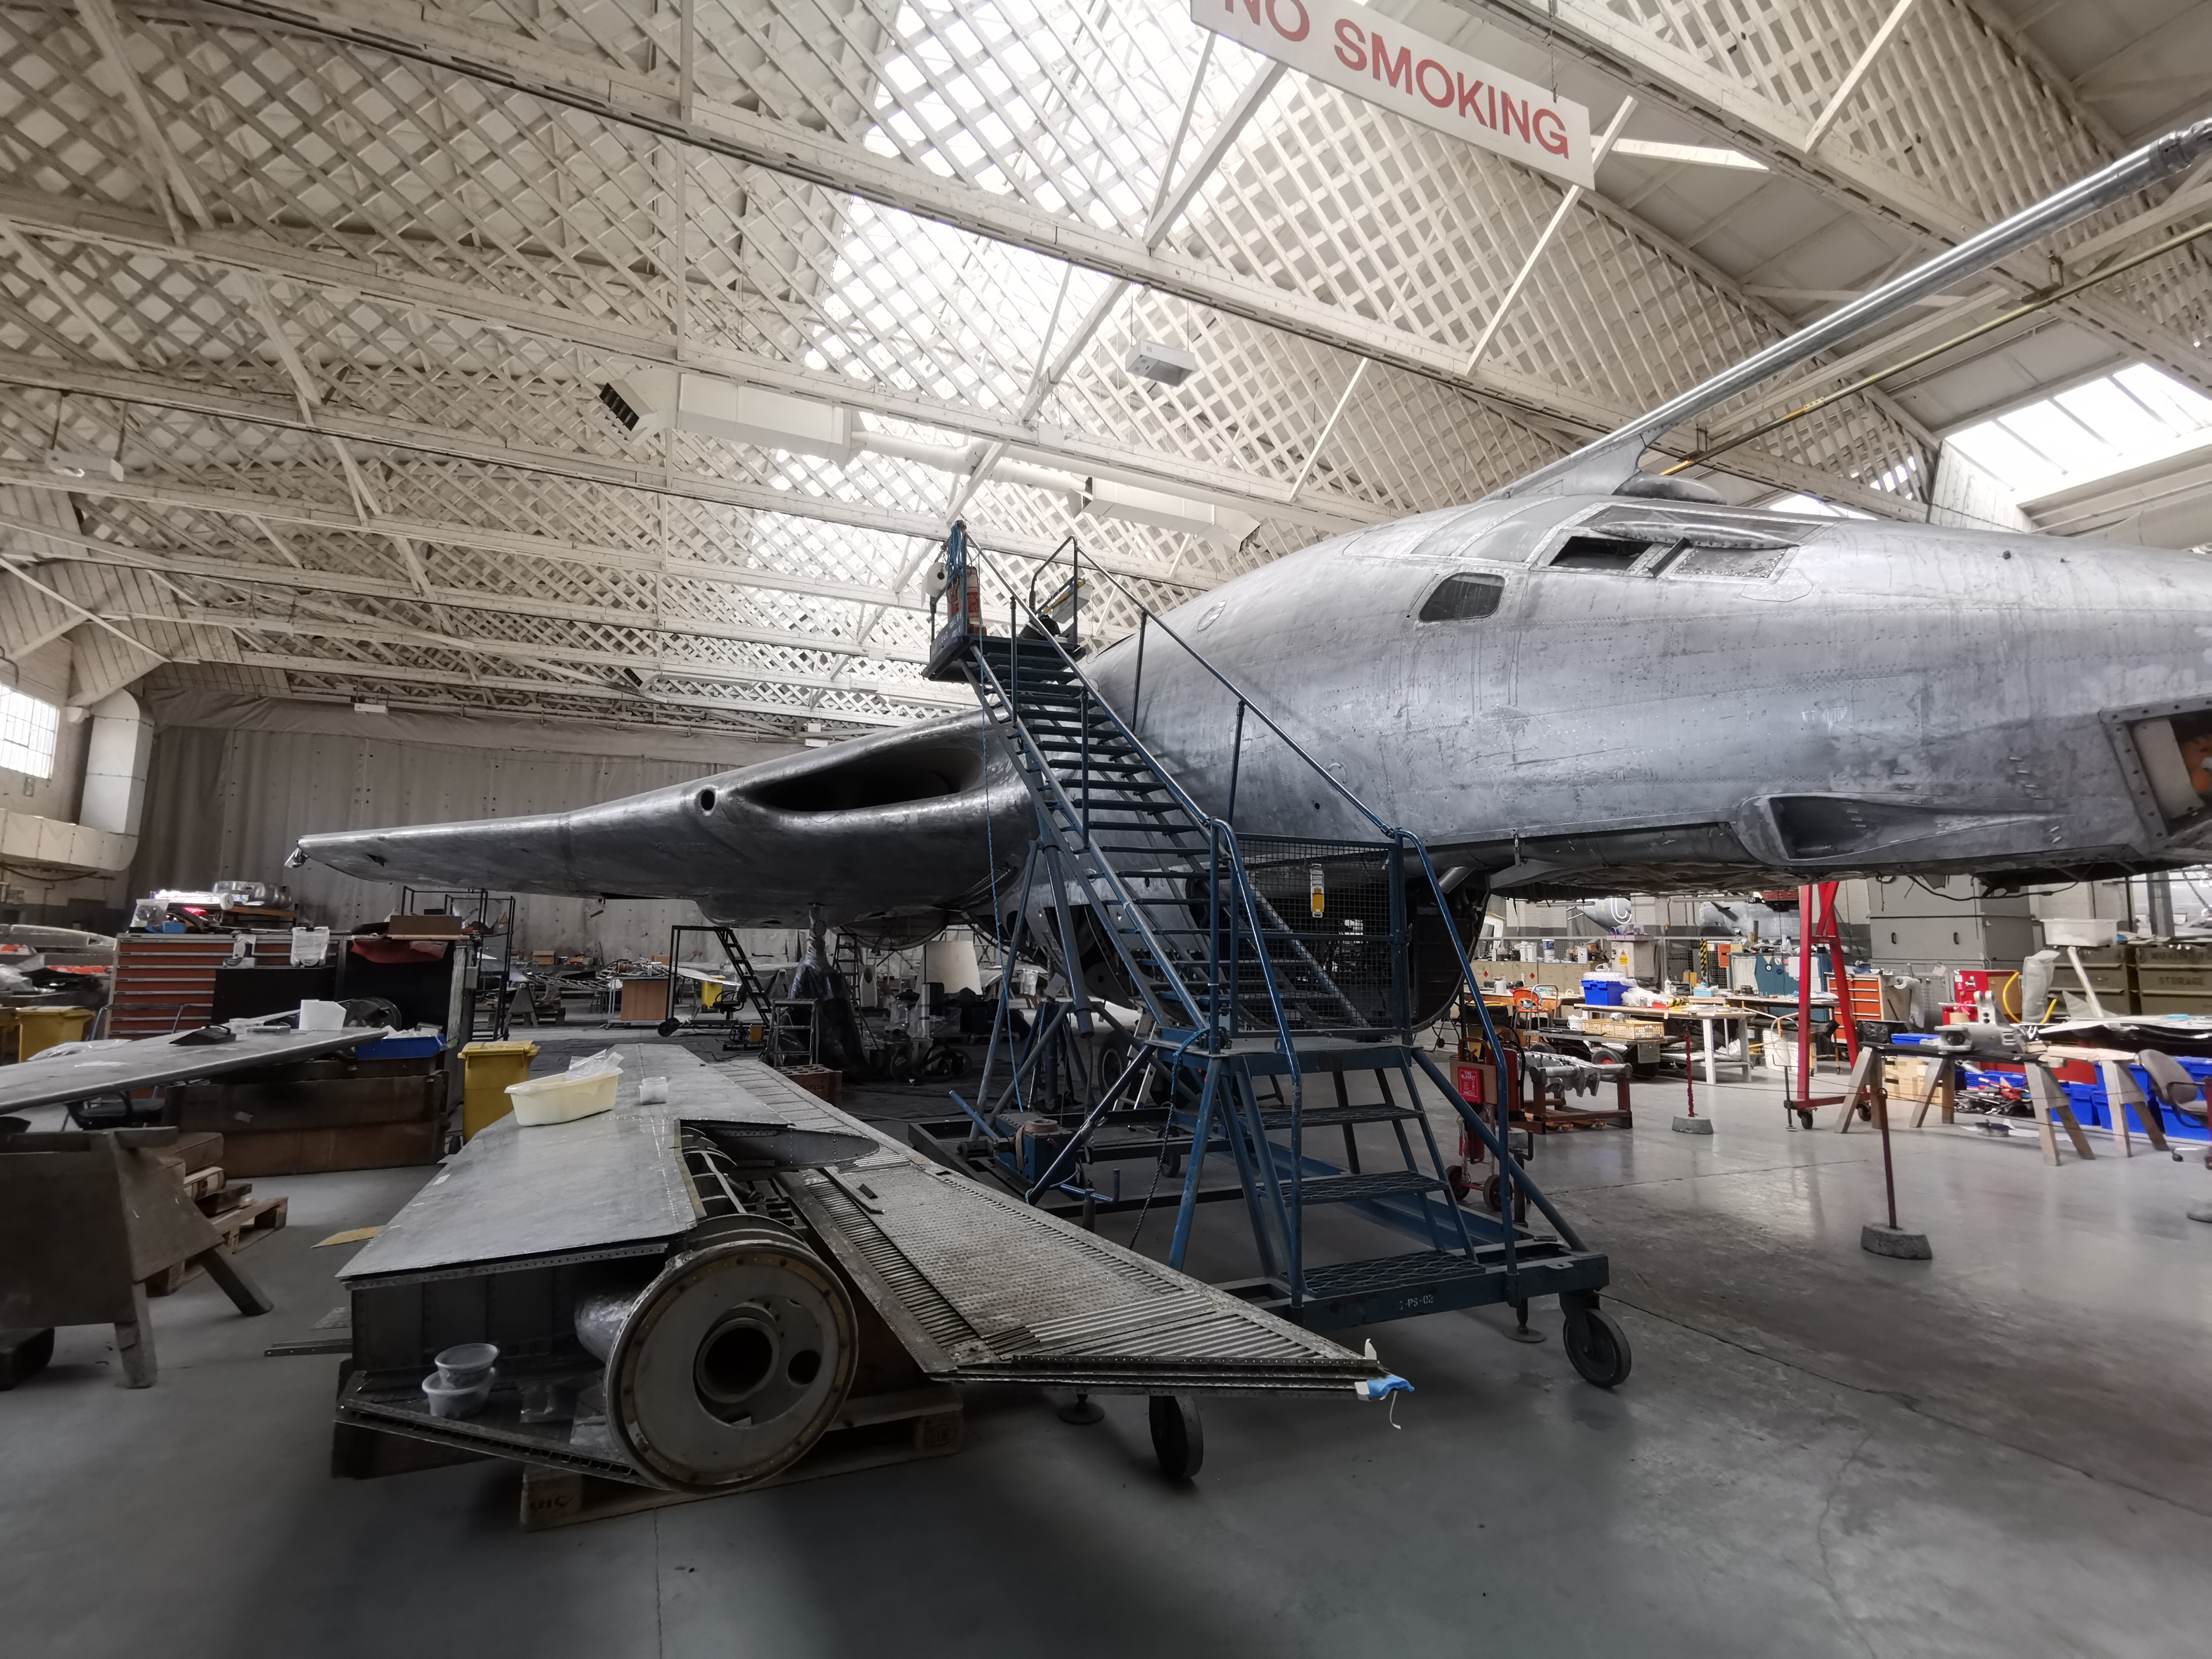 Handley Page Victor B.1 S/N XH648 undergoing restoration at Imperial War Museum Duxford, UK